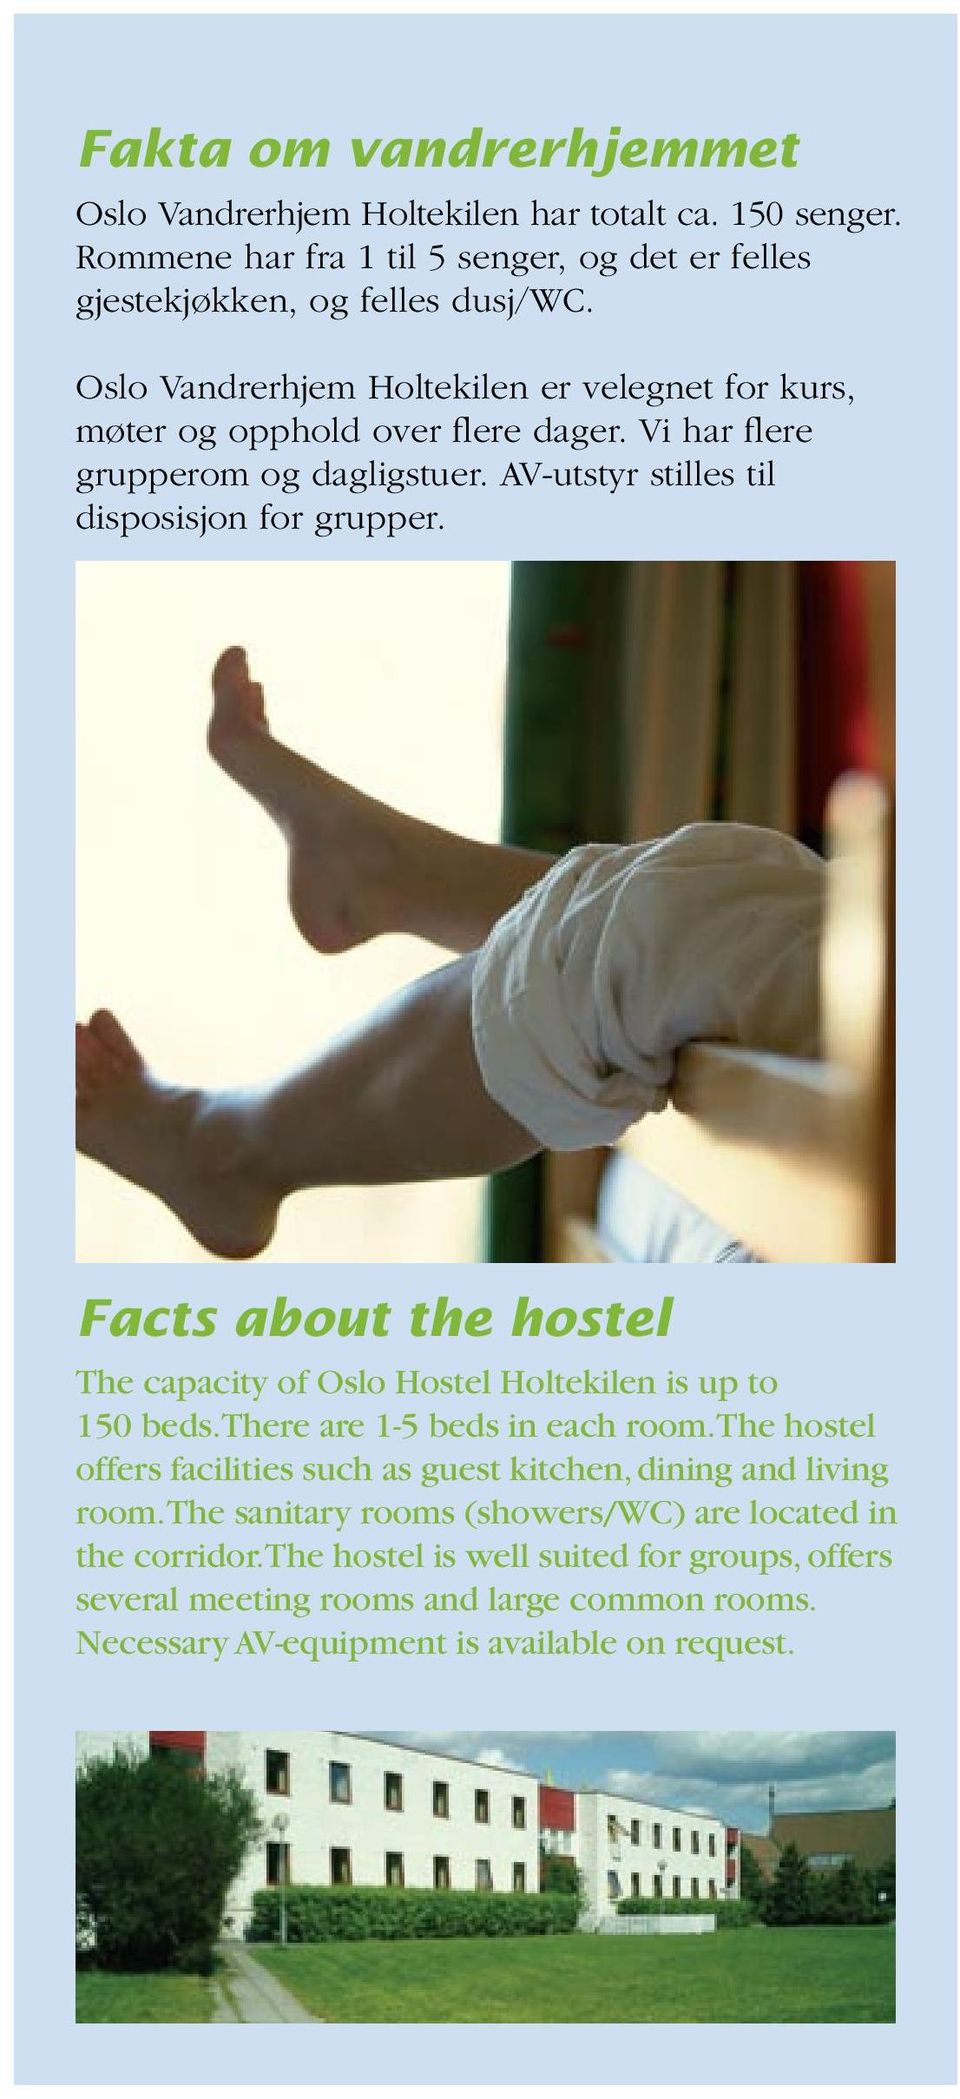 Facts about the hostel The capacity of Oslo Hostel Holtekilen is up to 150 beds. There are 1-5 beds in each room.